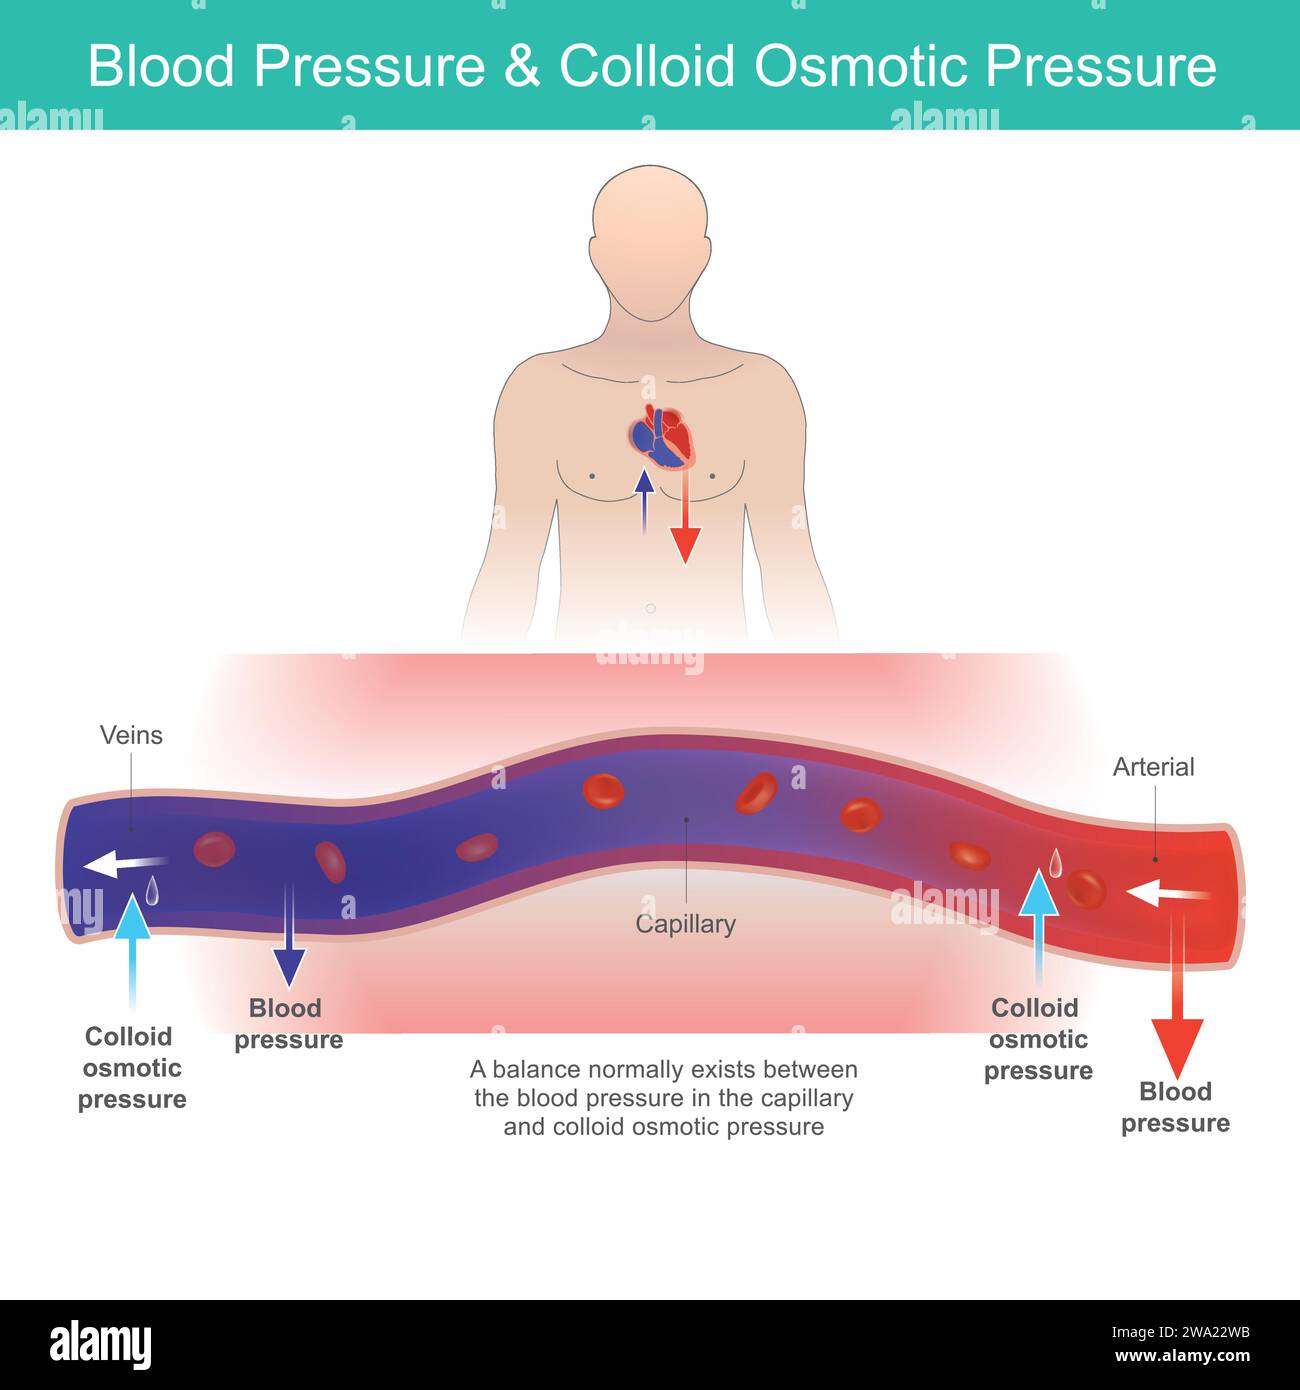 Blood Pressure & Osmotic Pressure. The relationship of blood pressure and colloid osmotic pressure in human blood vessel. Stock Vector